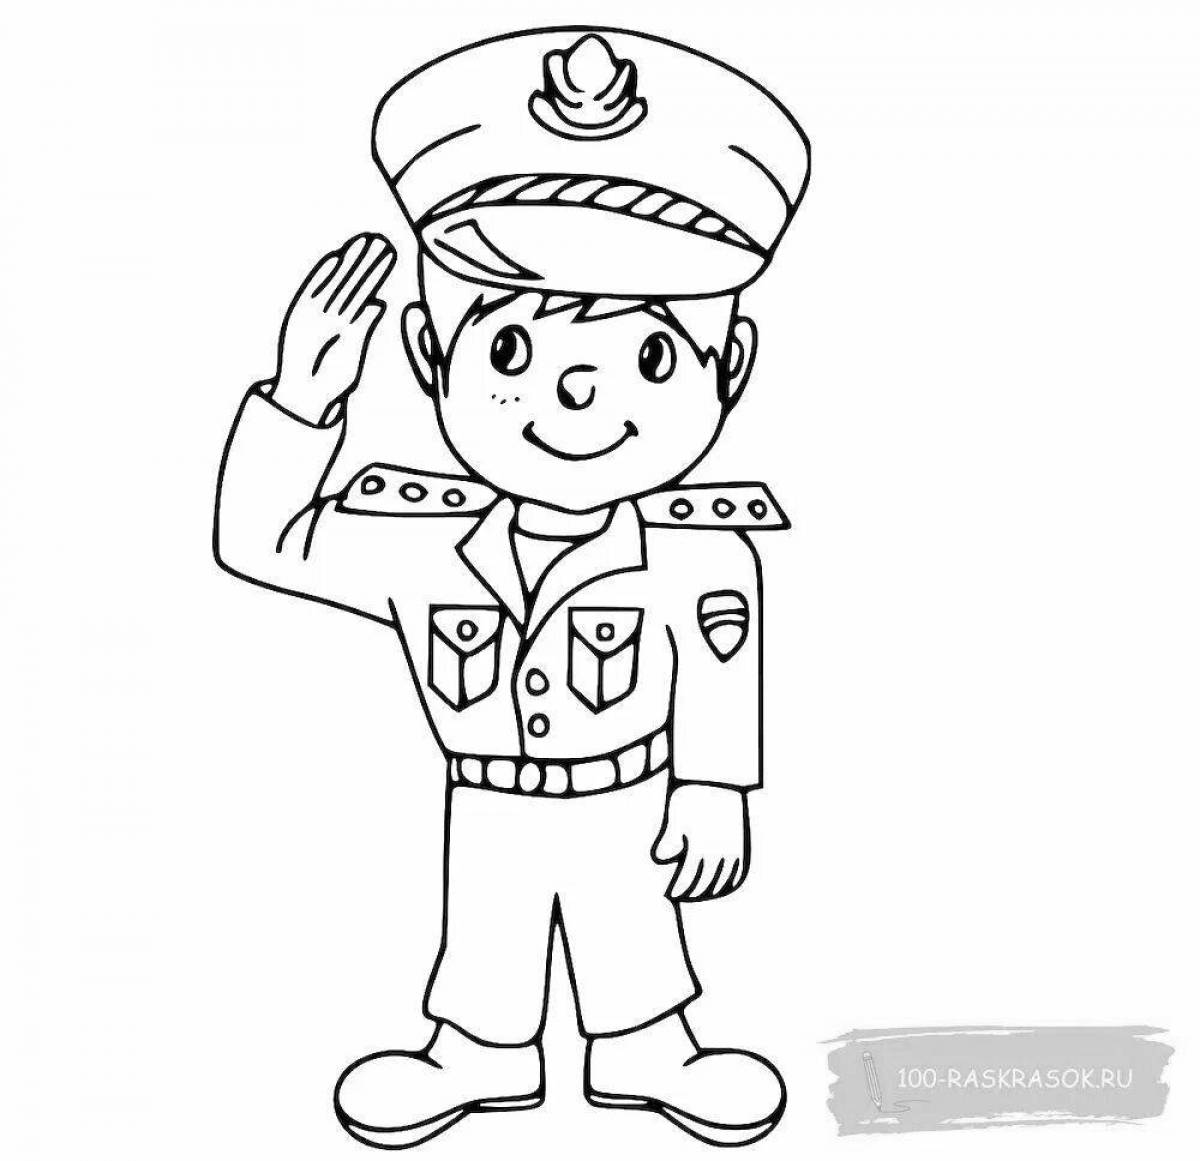 Fascinating Russian police coloring book